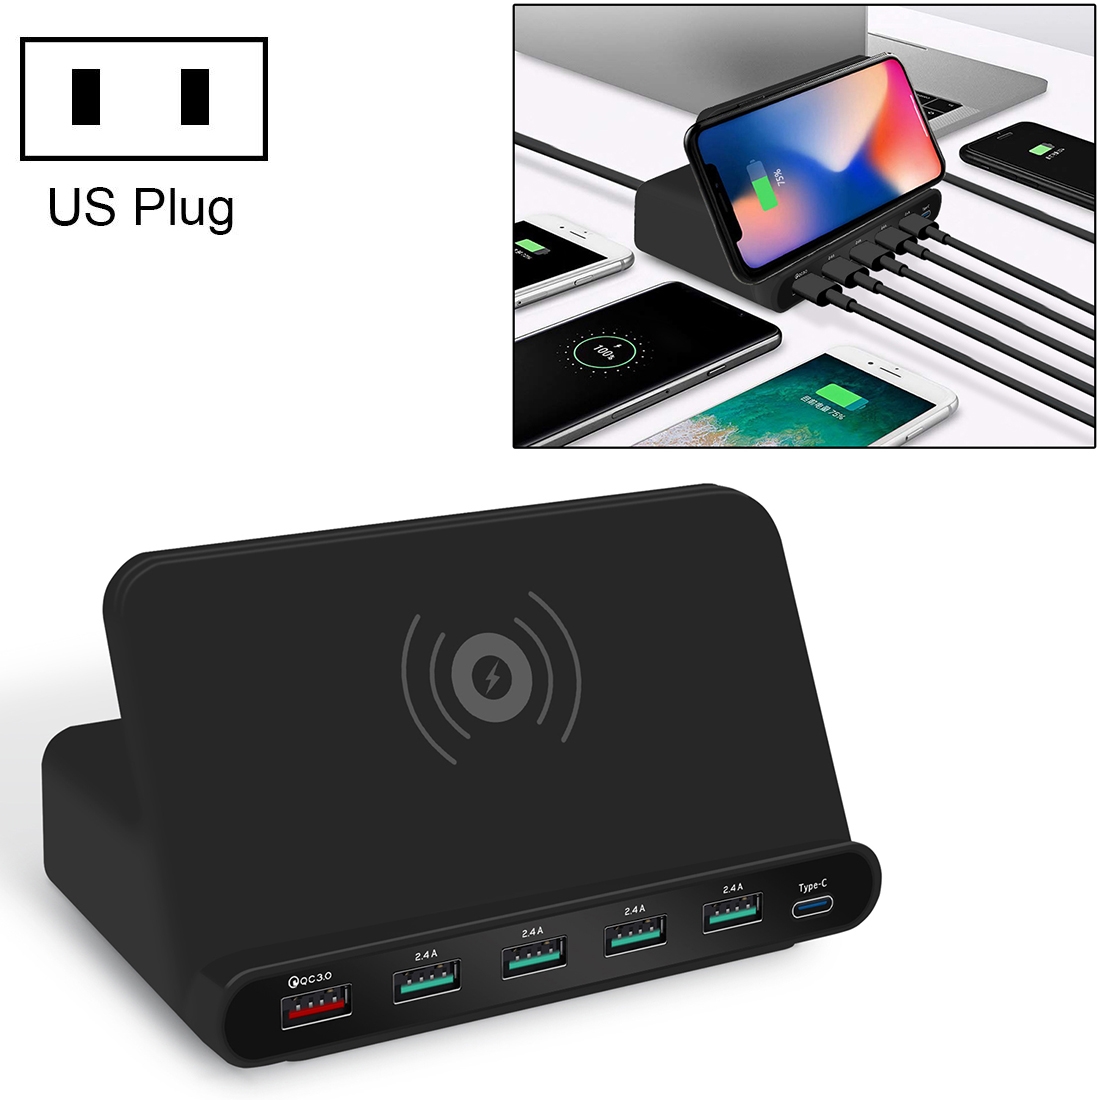 828W 7 in 1 60W QC 3.0 USB Interface + 4 USB Ports + USB-C / Type-C Interface + Wireless Charging Multi-function Charger with Mobile Phone Holder Function, US Plug (Black)